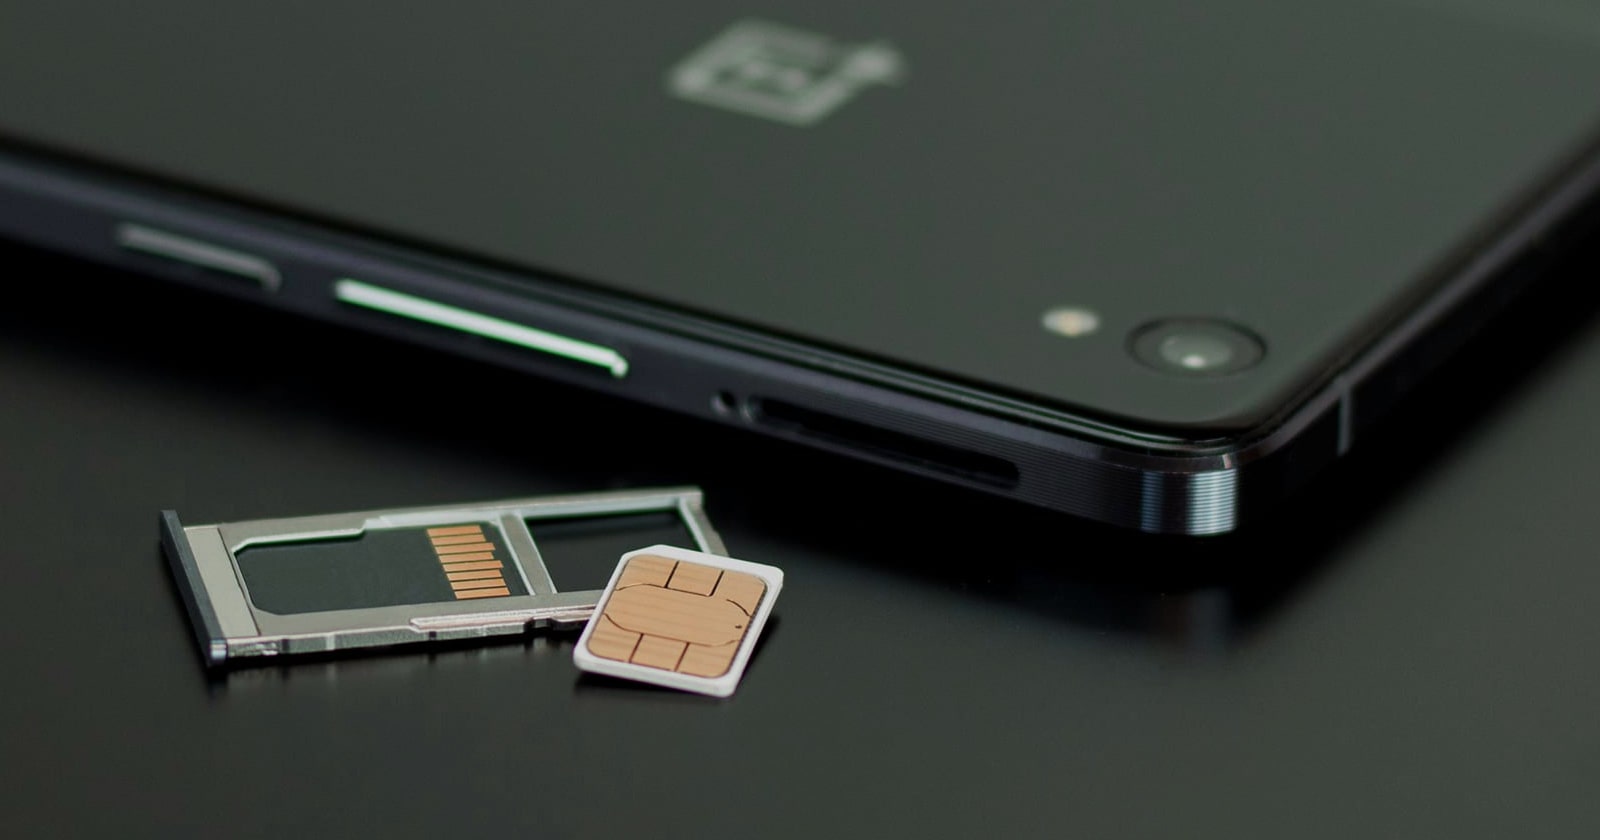 Can I use the sim card from my old phone in my new phone?